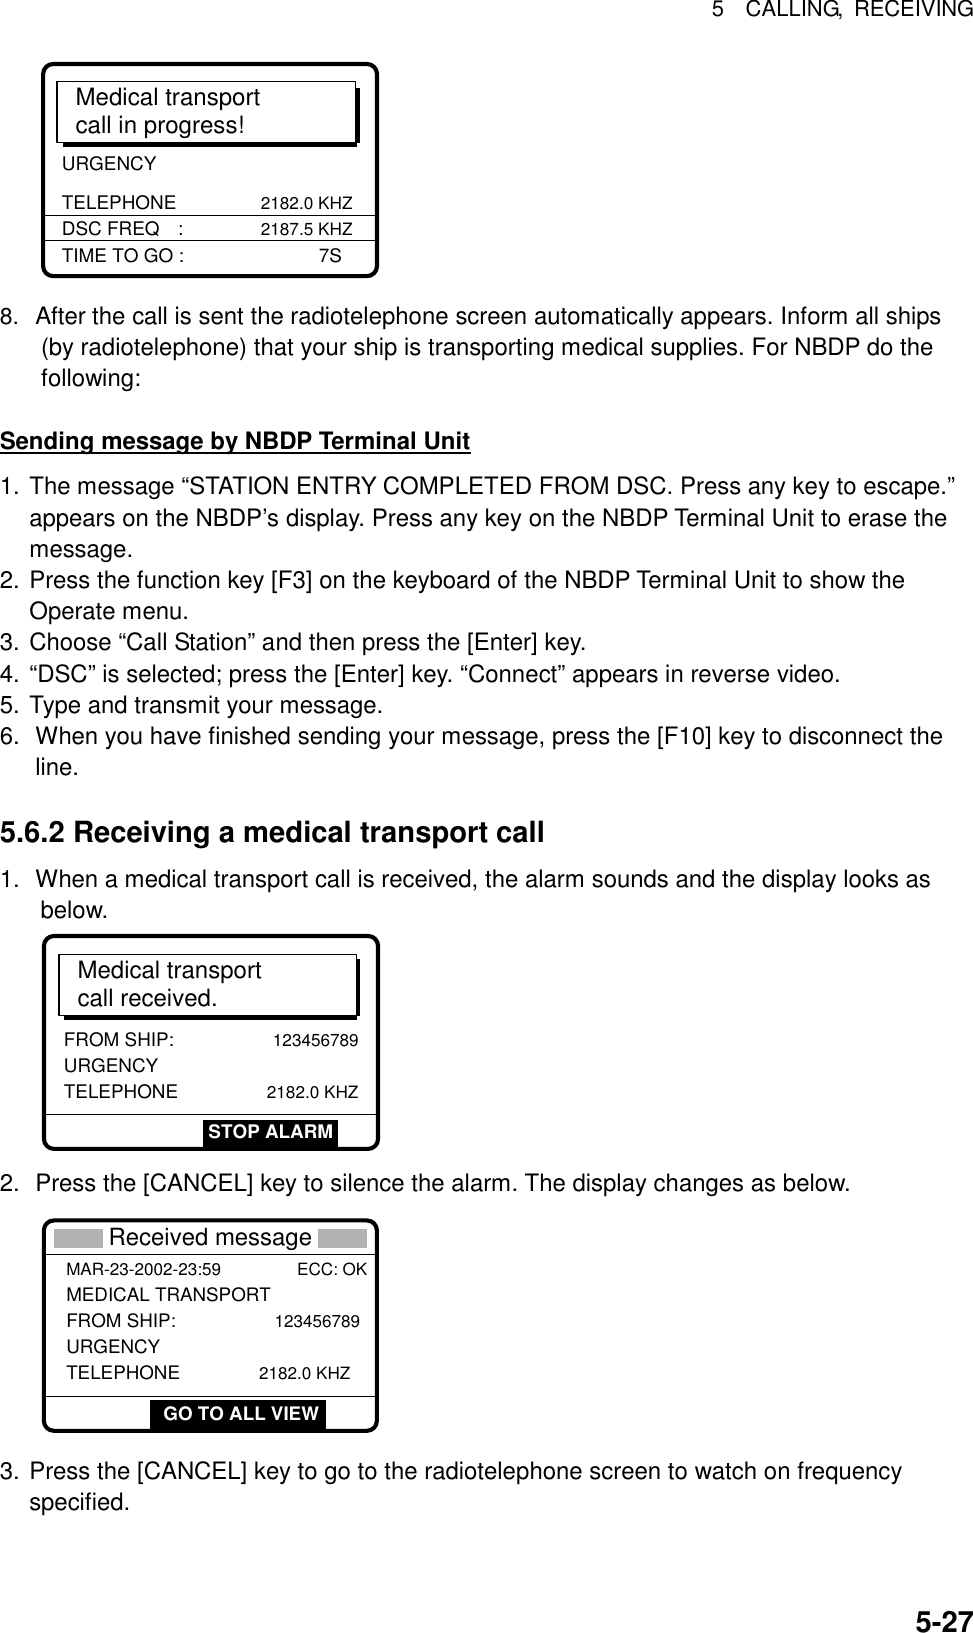 5  CALLING, RECEIVING  5-27URGENCY TELEPHONE              2182.0 KHZMedical transportcall in progress!TIME TO GO :        7SDSC FREQ :             2187.5 KHZ 8. After the call is sent the radiotelephone screen automatically appears. Inform all ships (by radiotelephone) that your ship is transporting medical supplies. For NBDP do the following:  Sending message by NBDP Terminal Unit 1. The message “STATION ENTRY COMPLETED FROM DSC. Press any key to escape.” appears on the NBDP’s display. Press any key on the NBDP Terminal Unit to erase the message. 2. Press the function key [F3] on the keyboard of the NBDP Terminal Unit to show the Operate menu. 3. Choose “Call Station” and then press the [Enter] key. 4. “DSC” is selected; press the [Enter] key. “Connect” appears in reverse video. 5. Type and transmit your message. 6.  When you have finished sending your message, press the [F10] key to disconnect the line.  5.6.2 Receiving a medical transport call 1.  When a medical transport call is received, the alarm sounds and the display looks as below.  Medical transportcall received.FROM SHIP:              123456789URGENCY TELEPHONE               2182.0 KHZSTOP ALARM 2.  Press the [CANCEL] key to silence the alarm. The display changes as below.   GO TO ALL VIEW * Received message * MAR-23-2002-23:59 ECC: OK MEDICAL TRANSPORT FROM SHIP:              123456789URGENCY TELEPHONE             2182.0 KHZ GO TO ALL VIEW 3. Press the [CANCEL] key to go to the radiotelephone screen to watch on frequency specified. 